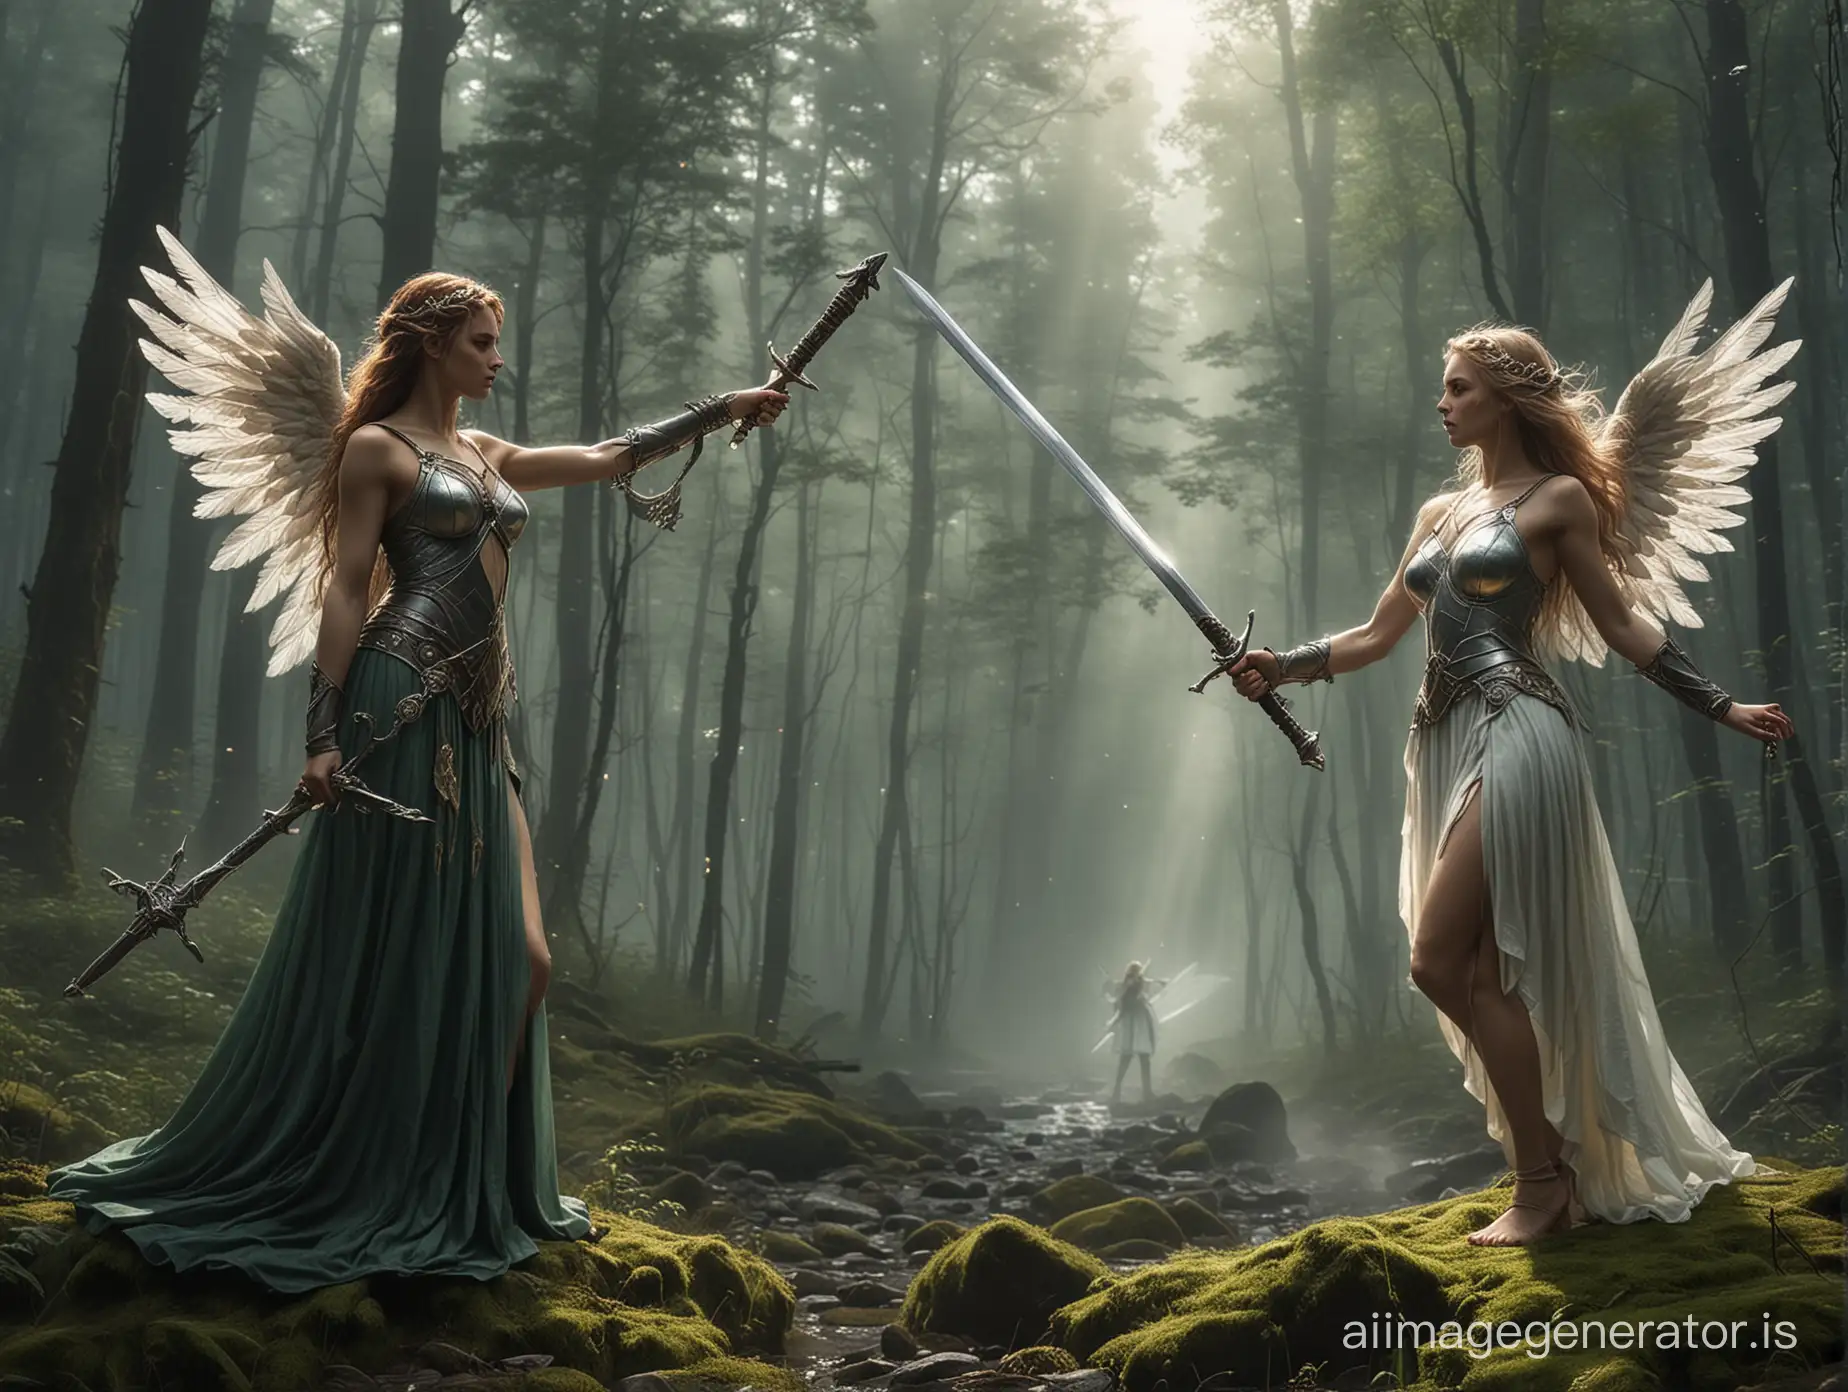 New task, against the backdrop of a mountain, make a battle between a forest nymph woman and an angel woman. The forest nymph woman to hold a forest scepter, and the angel woman a sword. The moment I want to capture is when the sword and scepter clash and sparks start to fly from them.